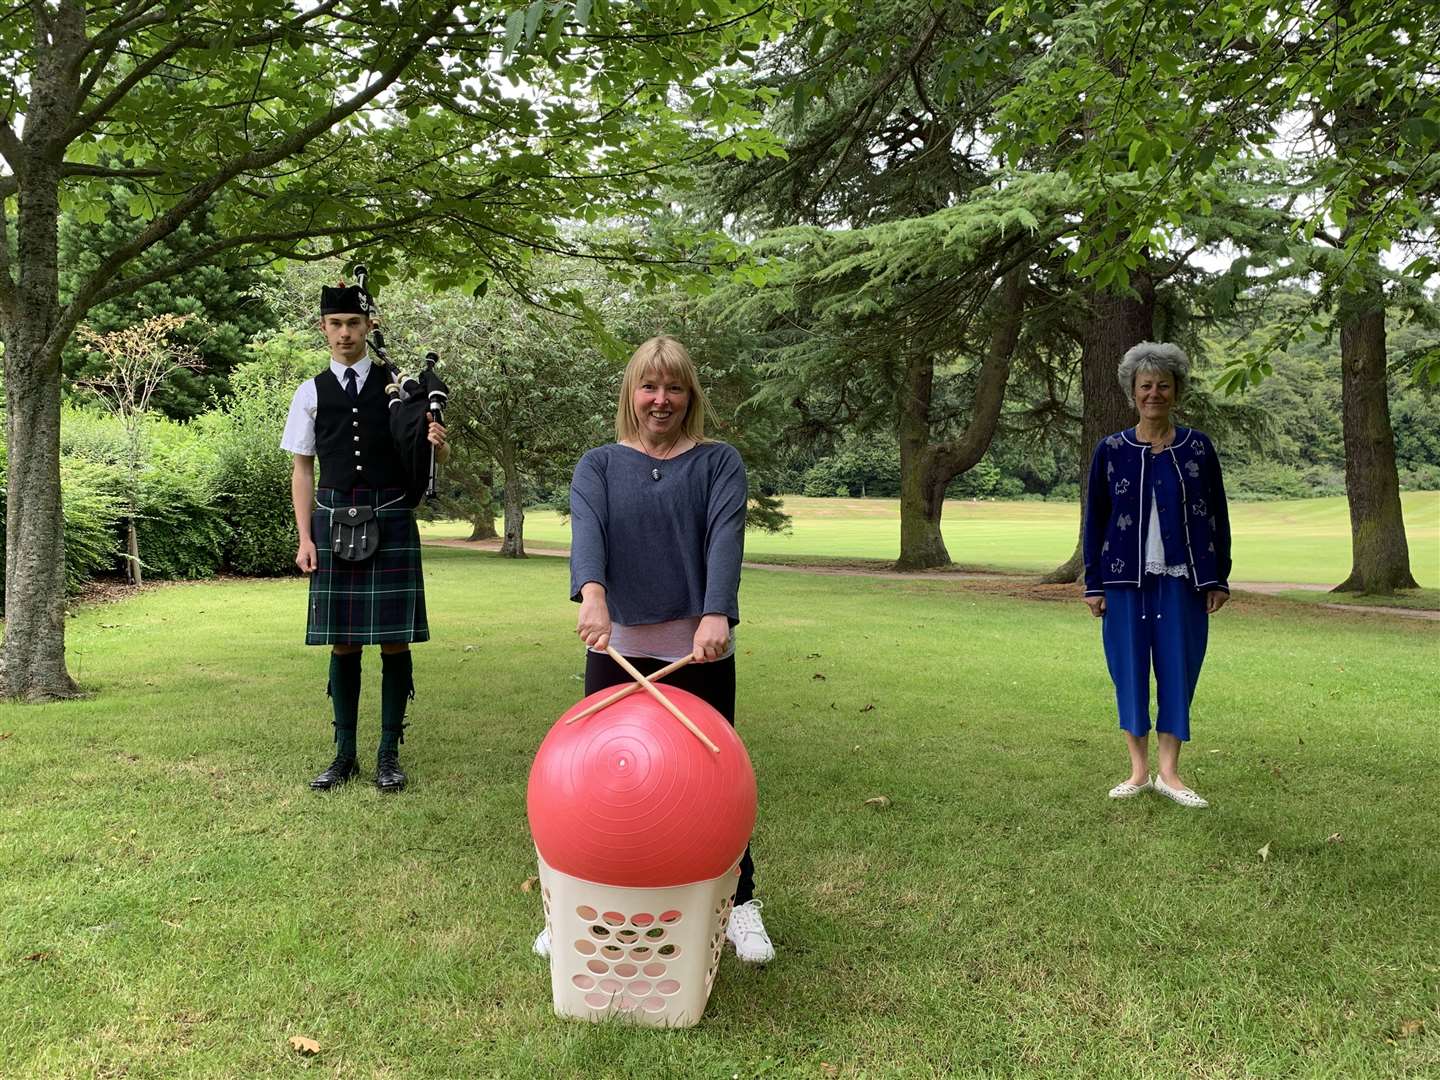 Calum Robertson from the Forres and District Pipe Band, Sharon Finlay from Active Minds Moray and Christine Grant from the Forres branch of the Royal Scottish Country Dancing Society.